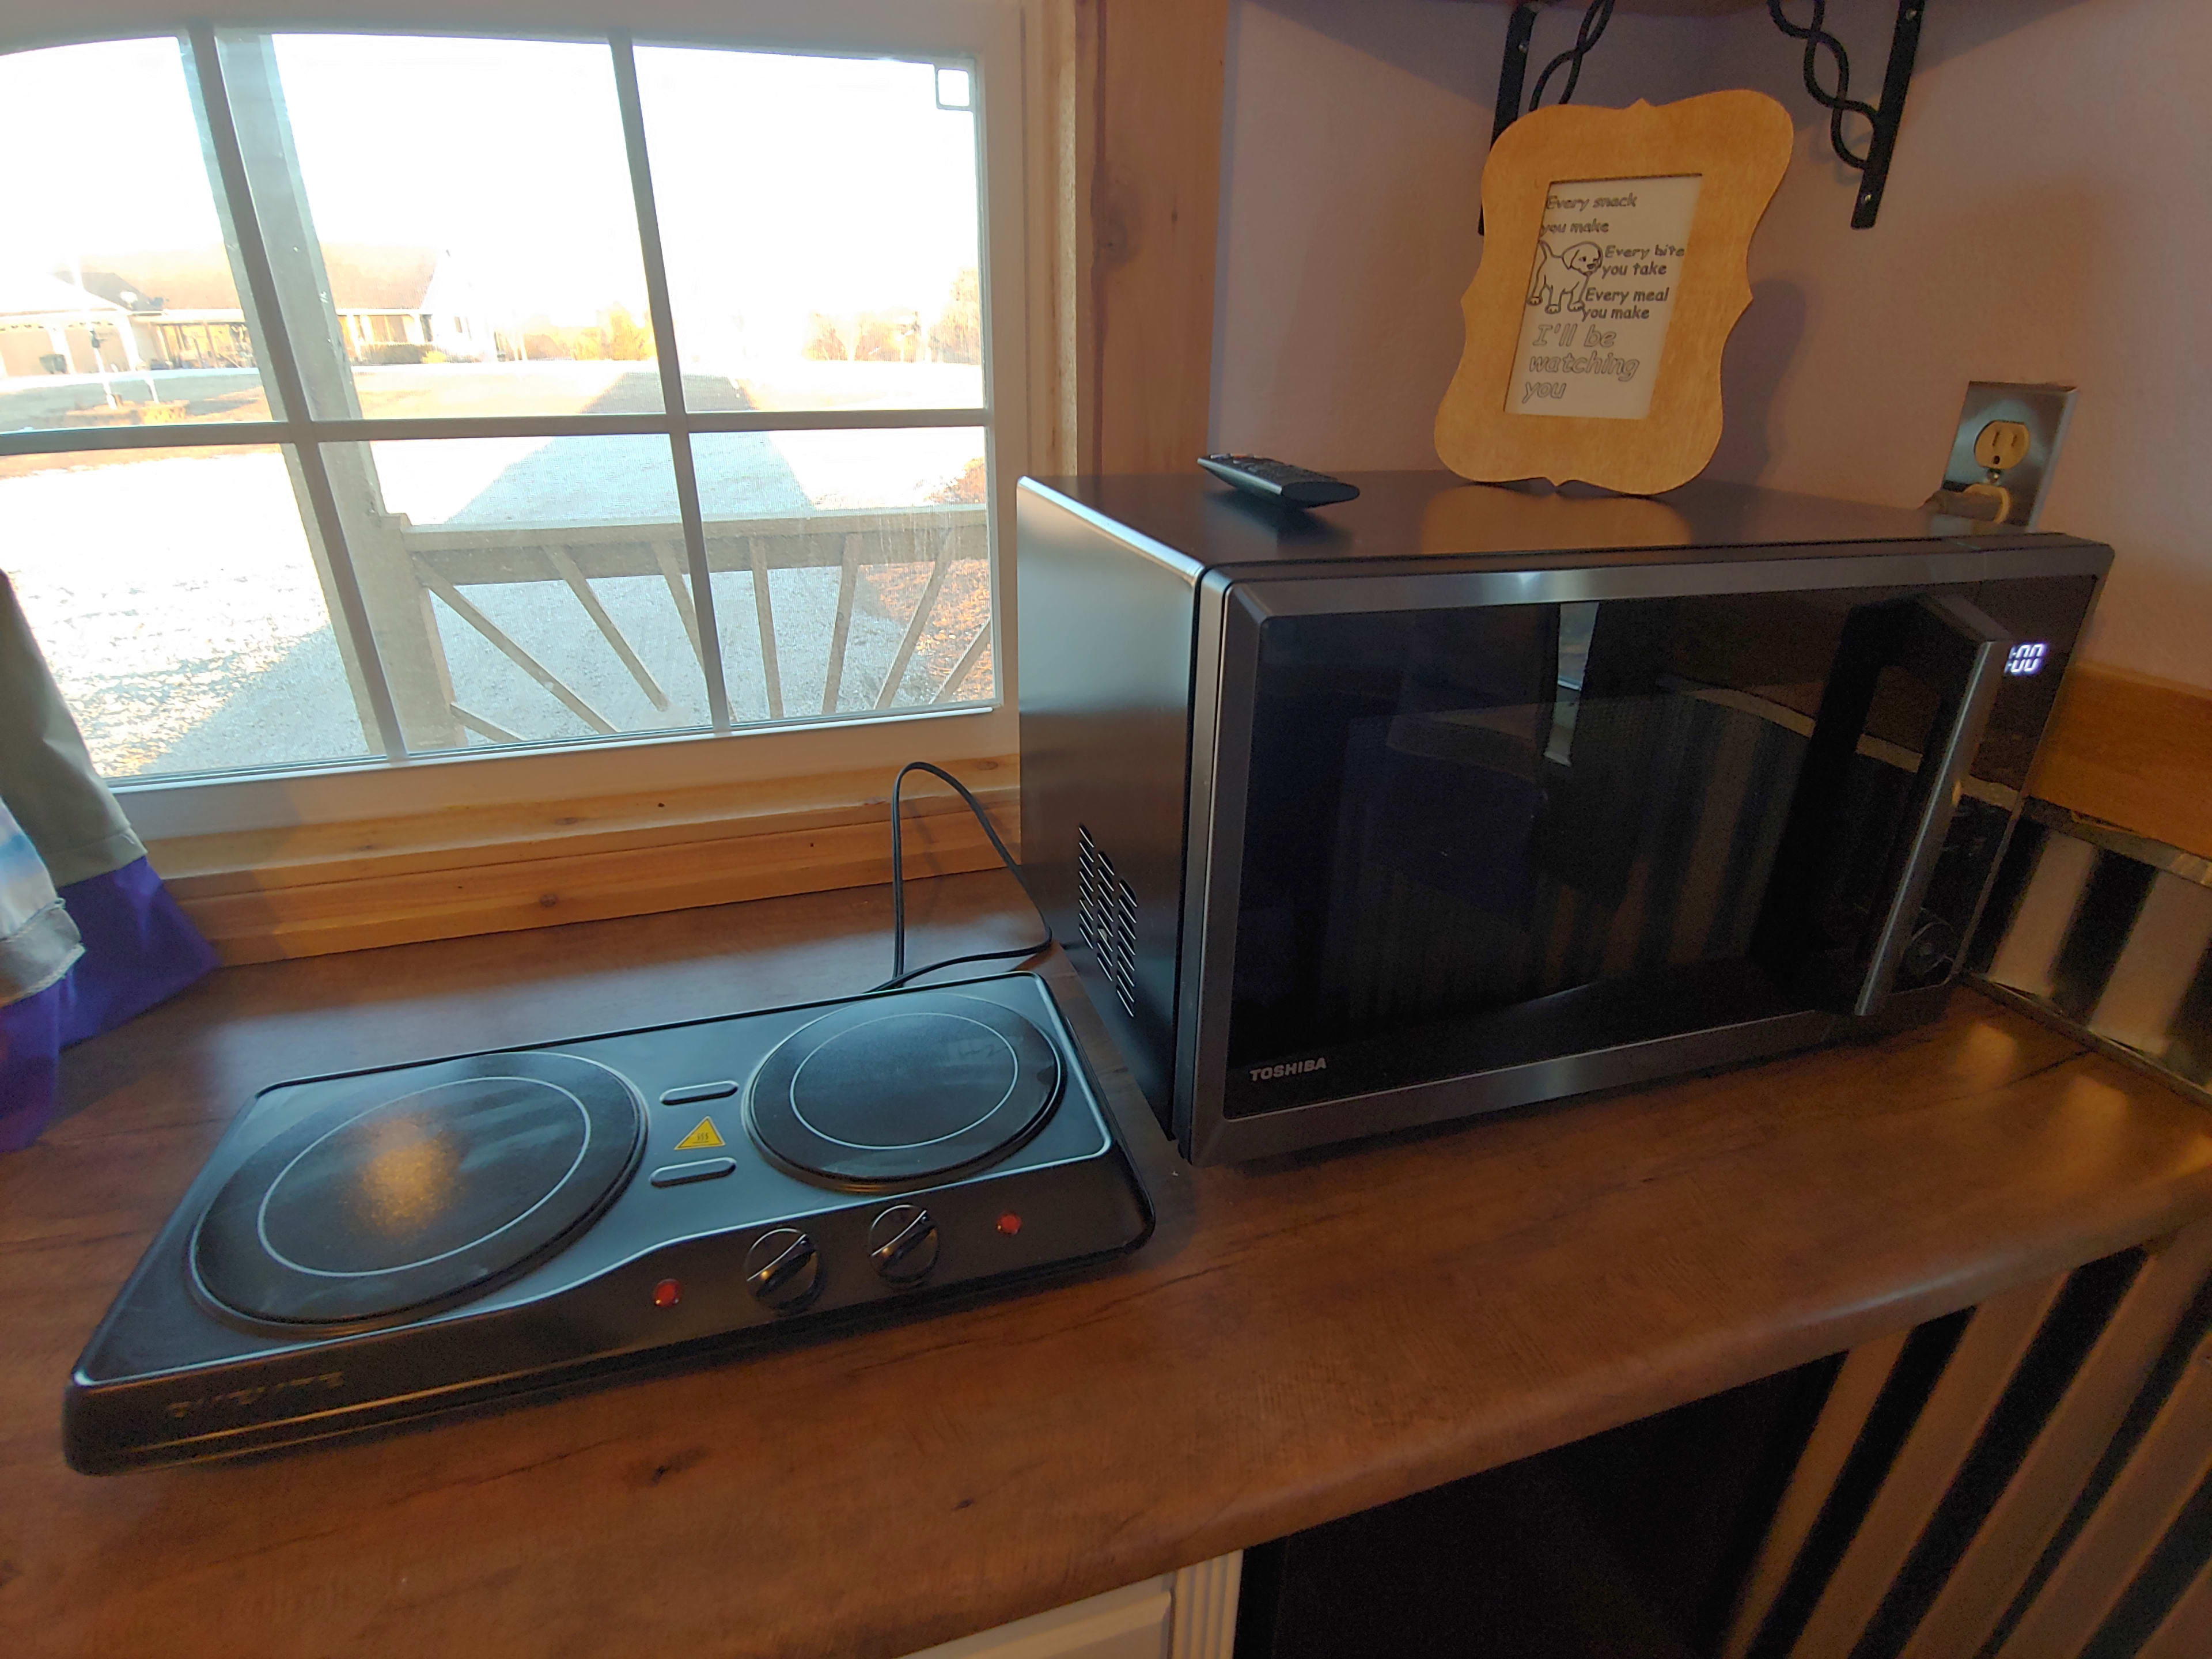 Hot plates and microwave/air fryer combo.